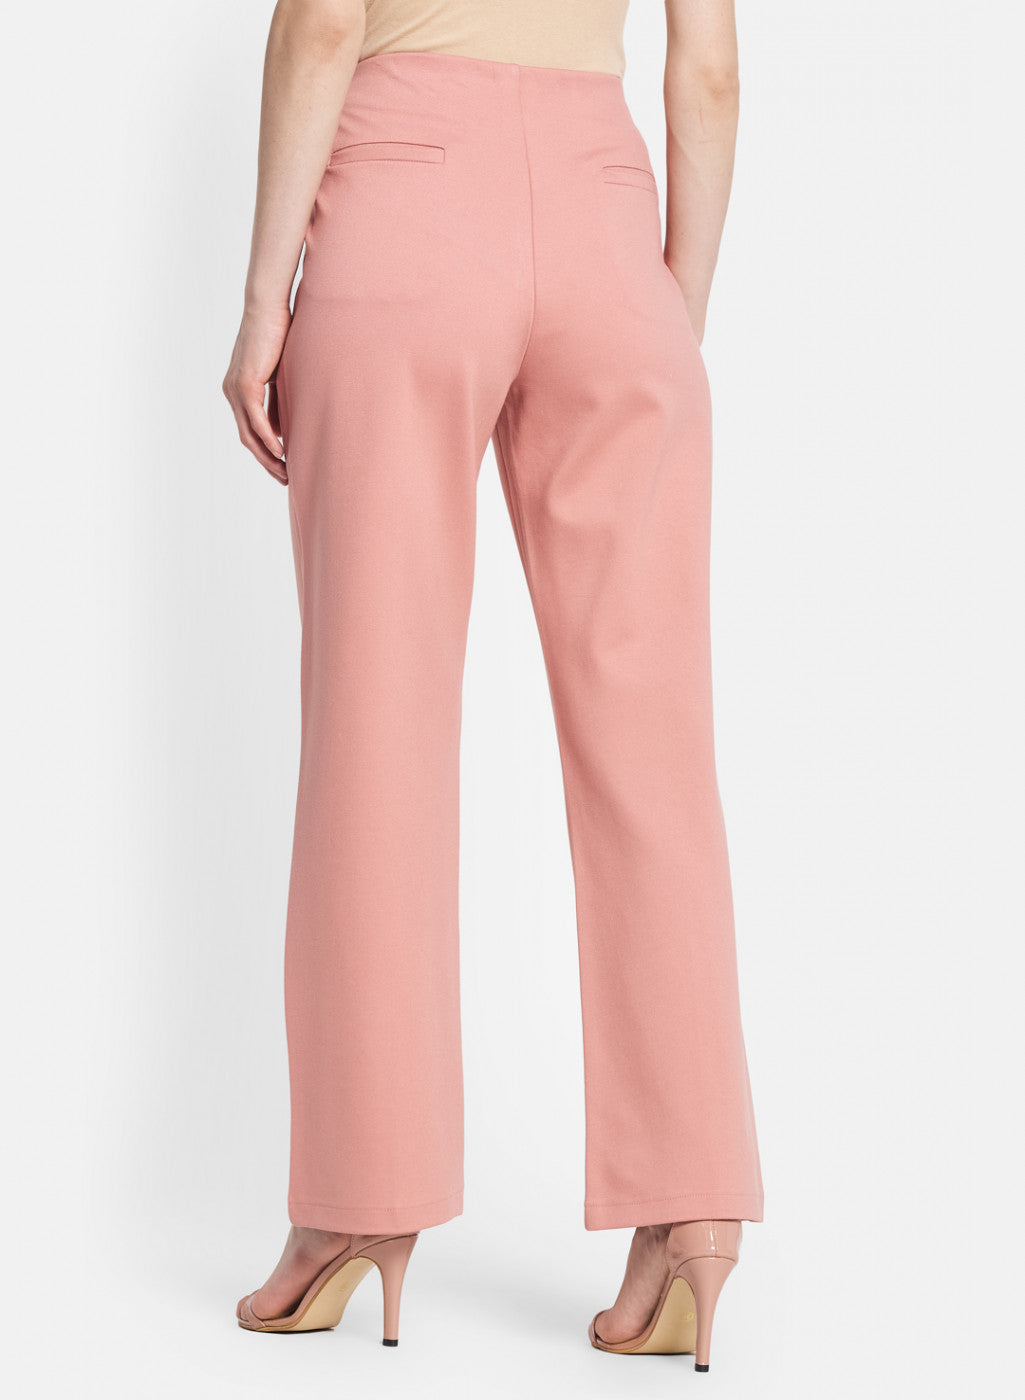 Peach Solid Jegging